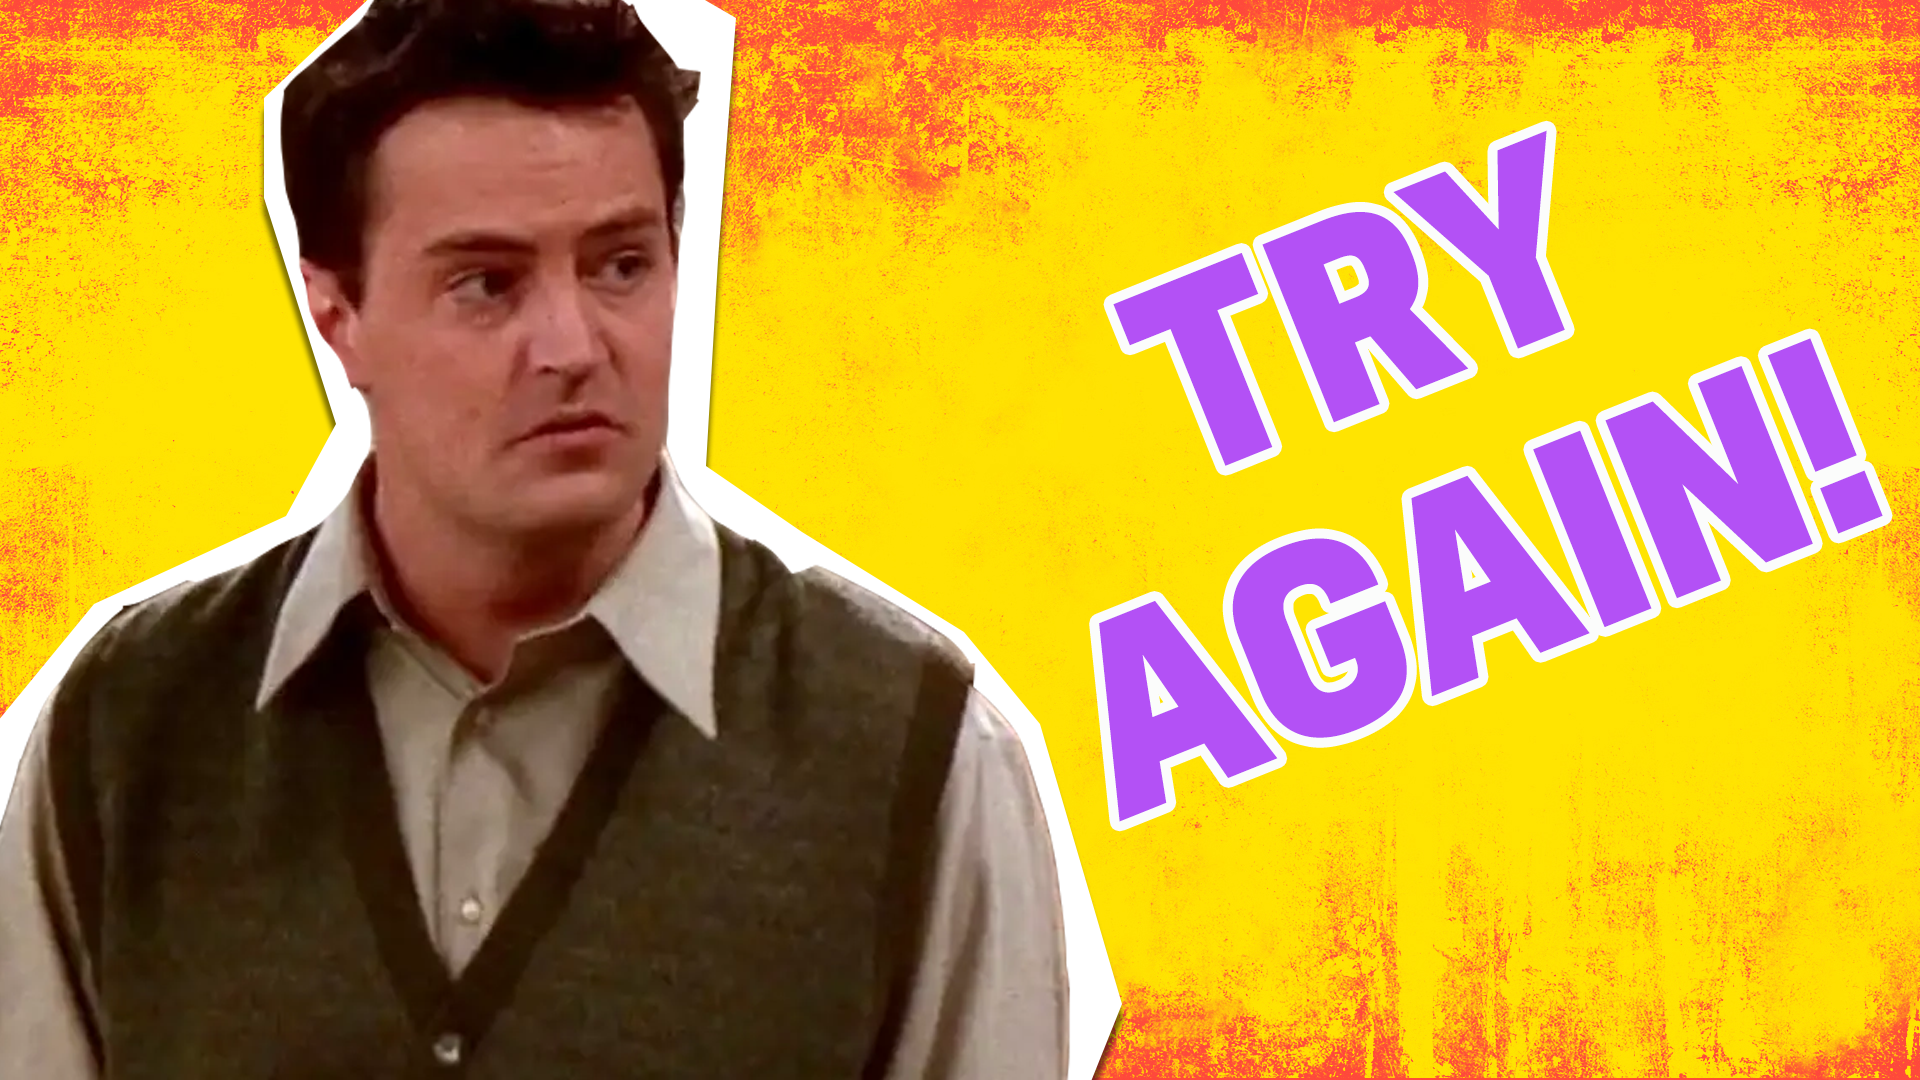 You've remembered SOME of the Friends guest stars, but you'll need to do better than that to get 100%! Try again!